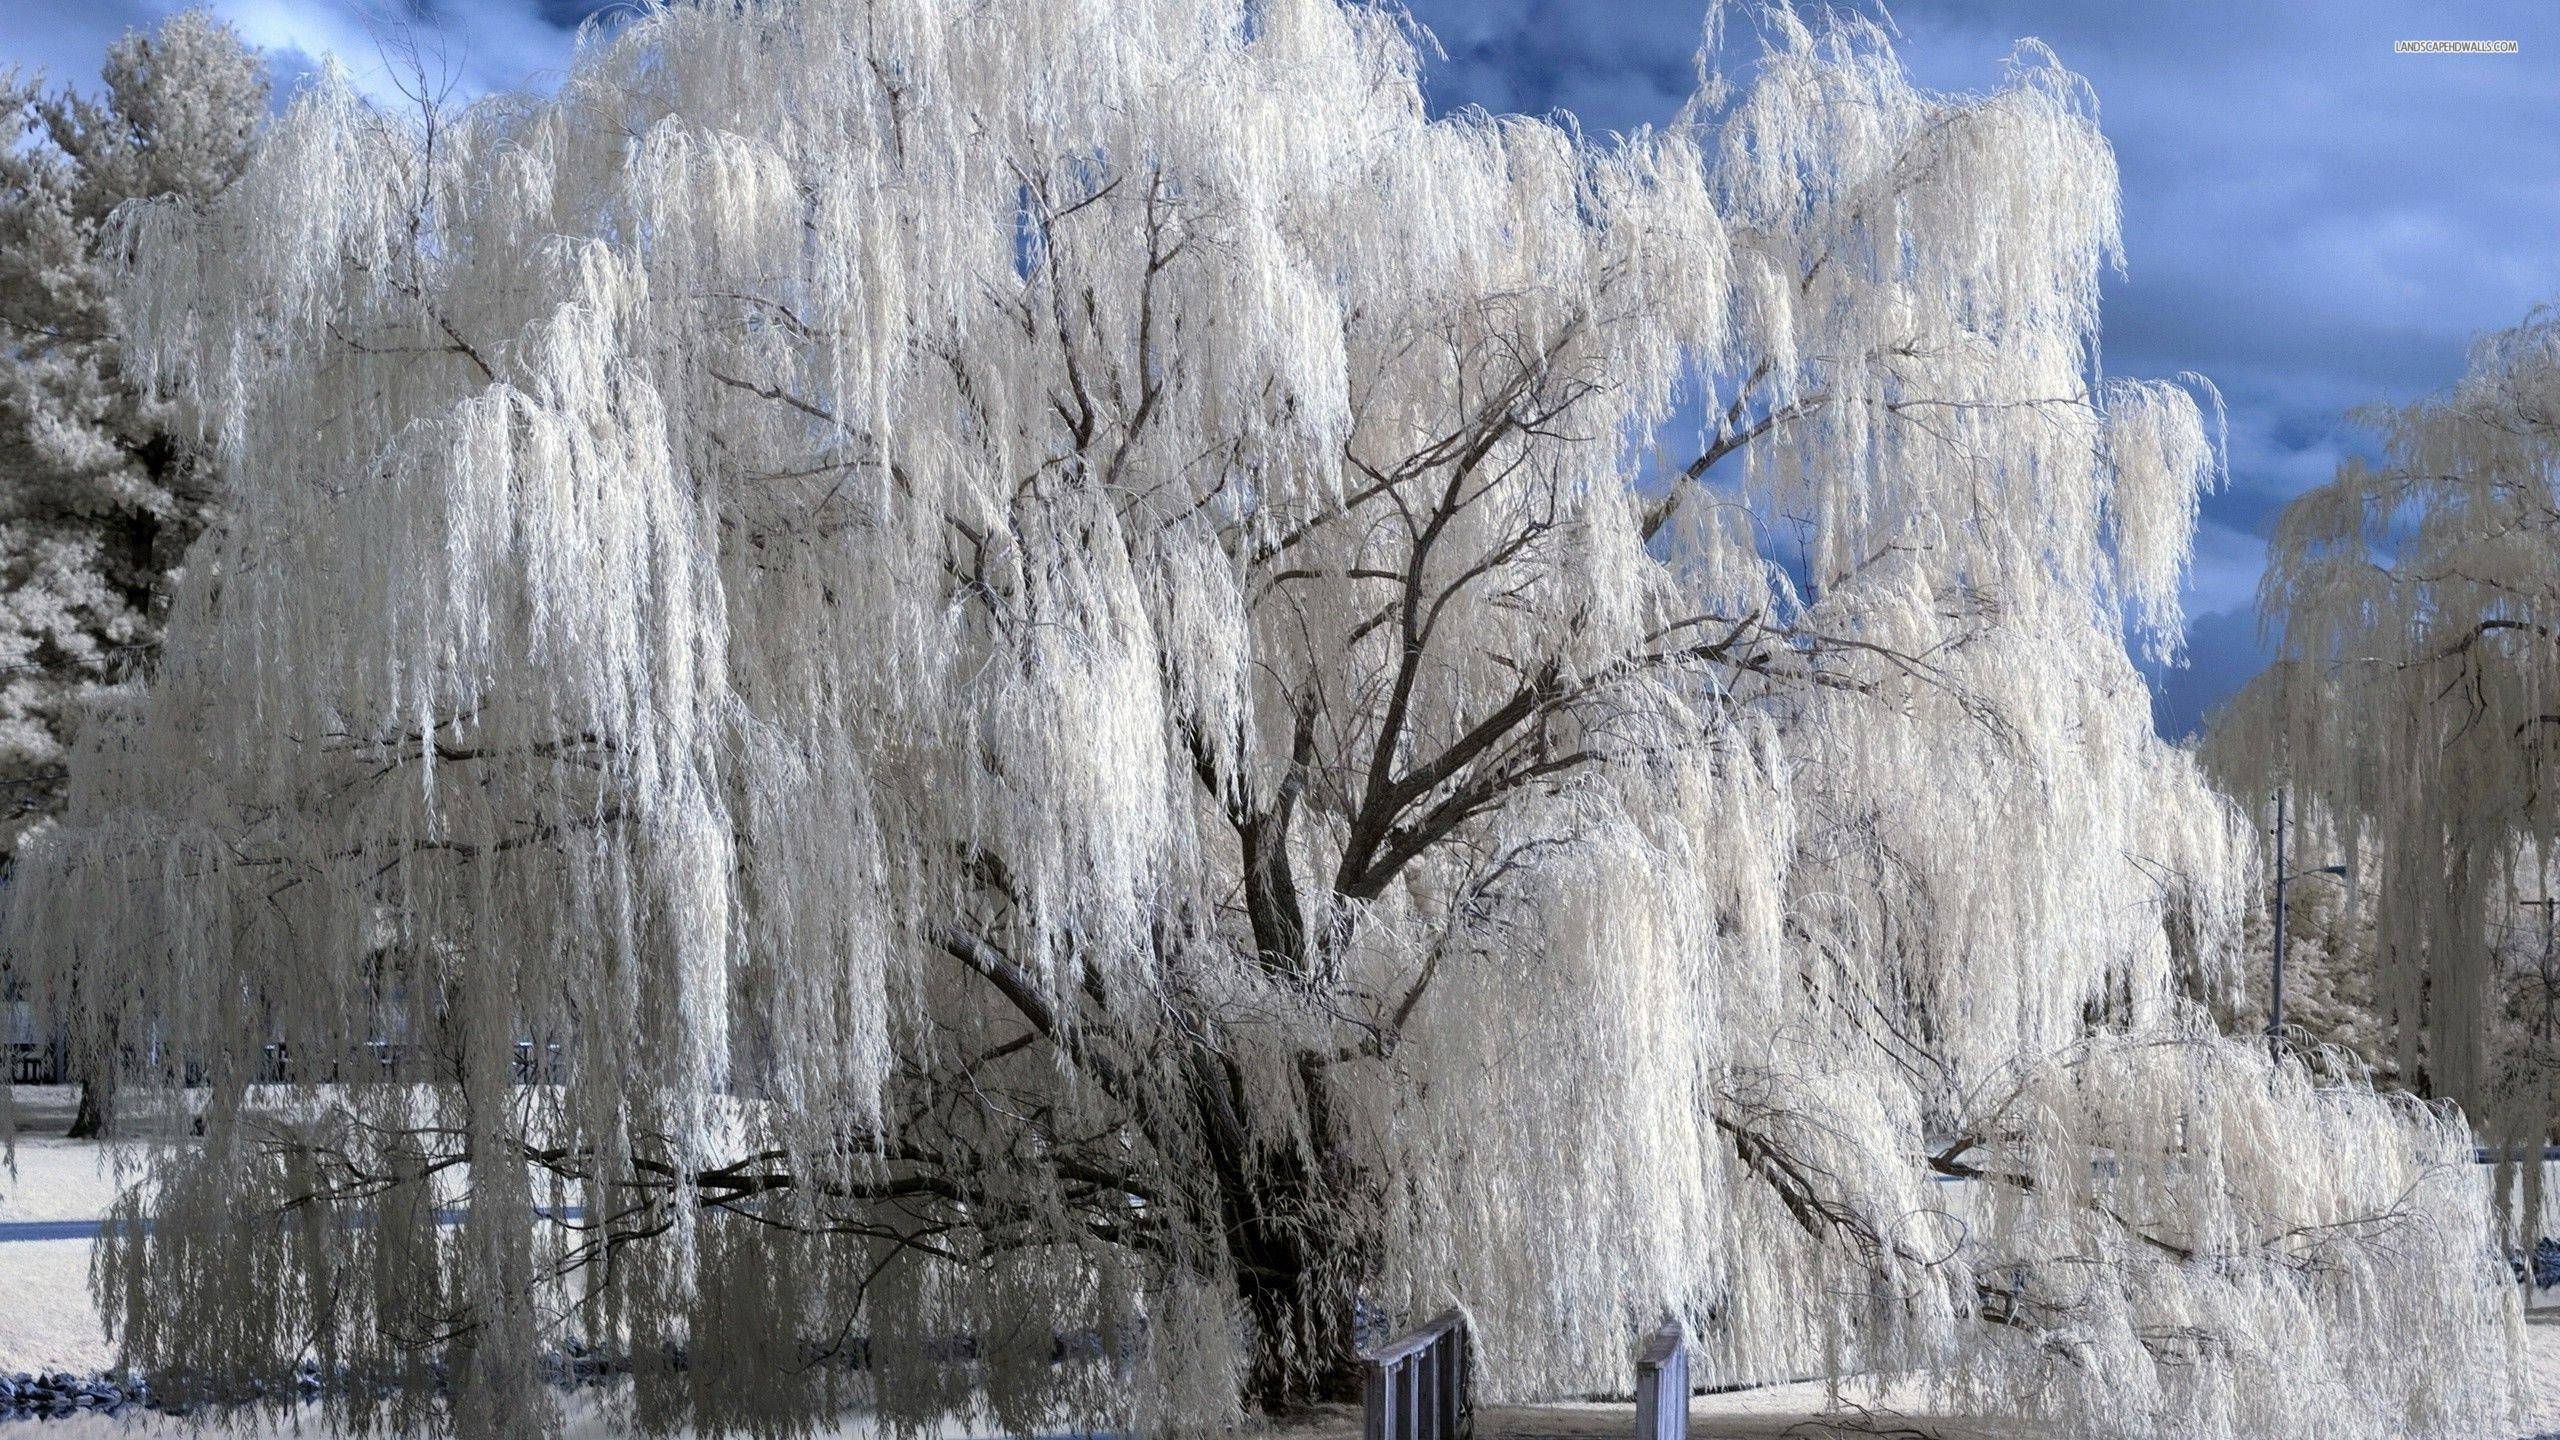 2560x1440, Snowy Weeping Willow Wallpaper - Weeping Willow Tree Snow - HD Wallpaper 